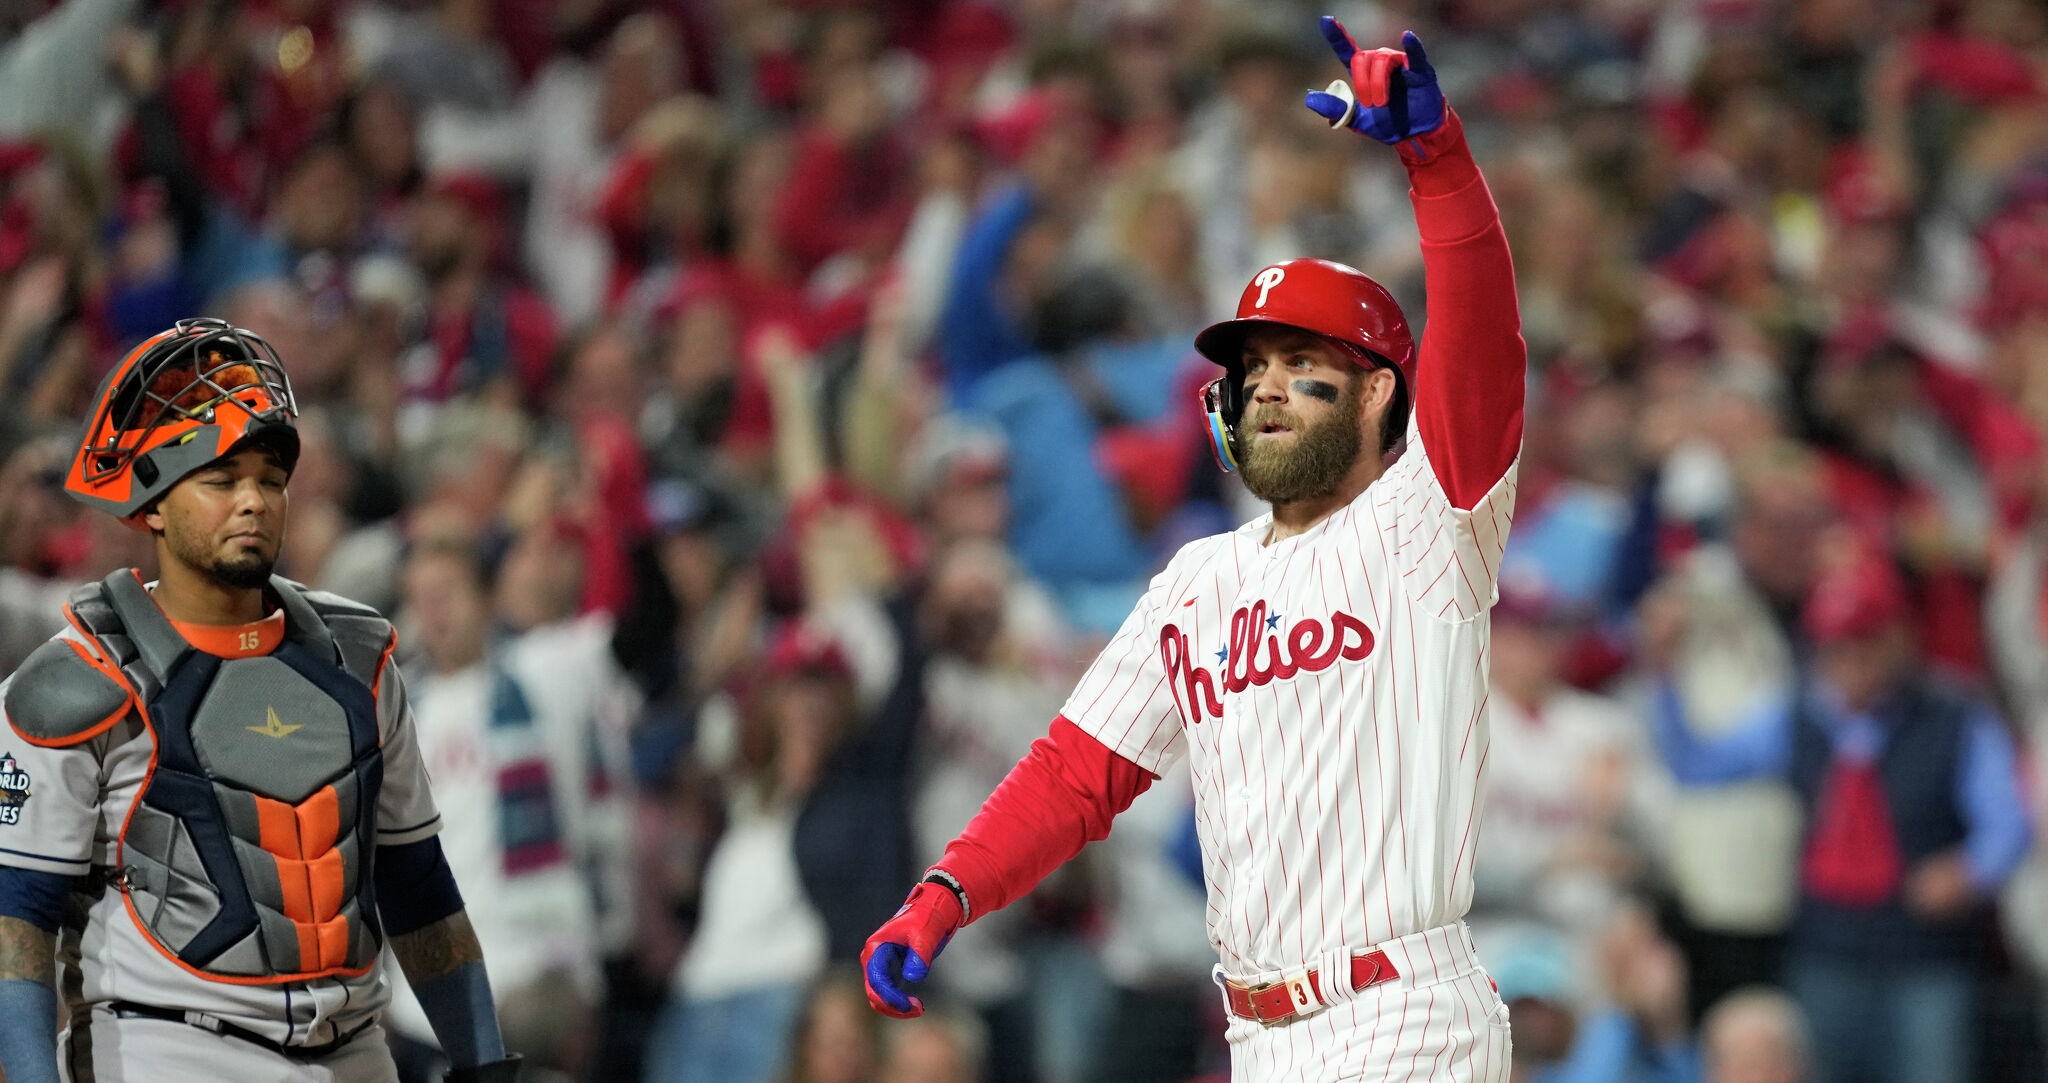 Photos of the Phillies 7-0 win in Game 3 of World Series